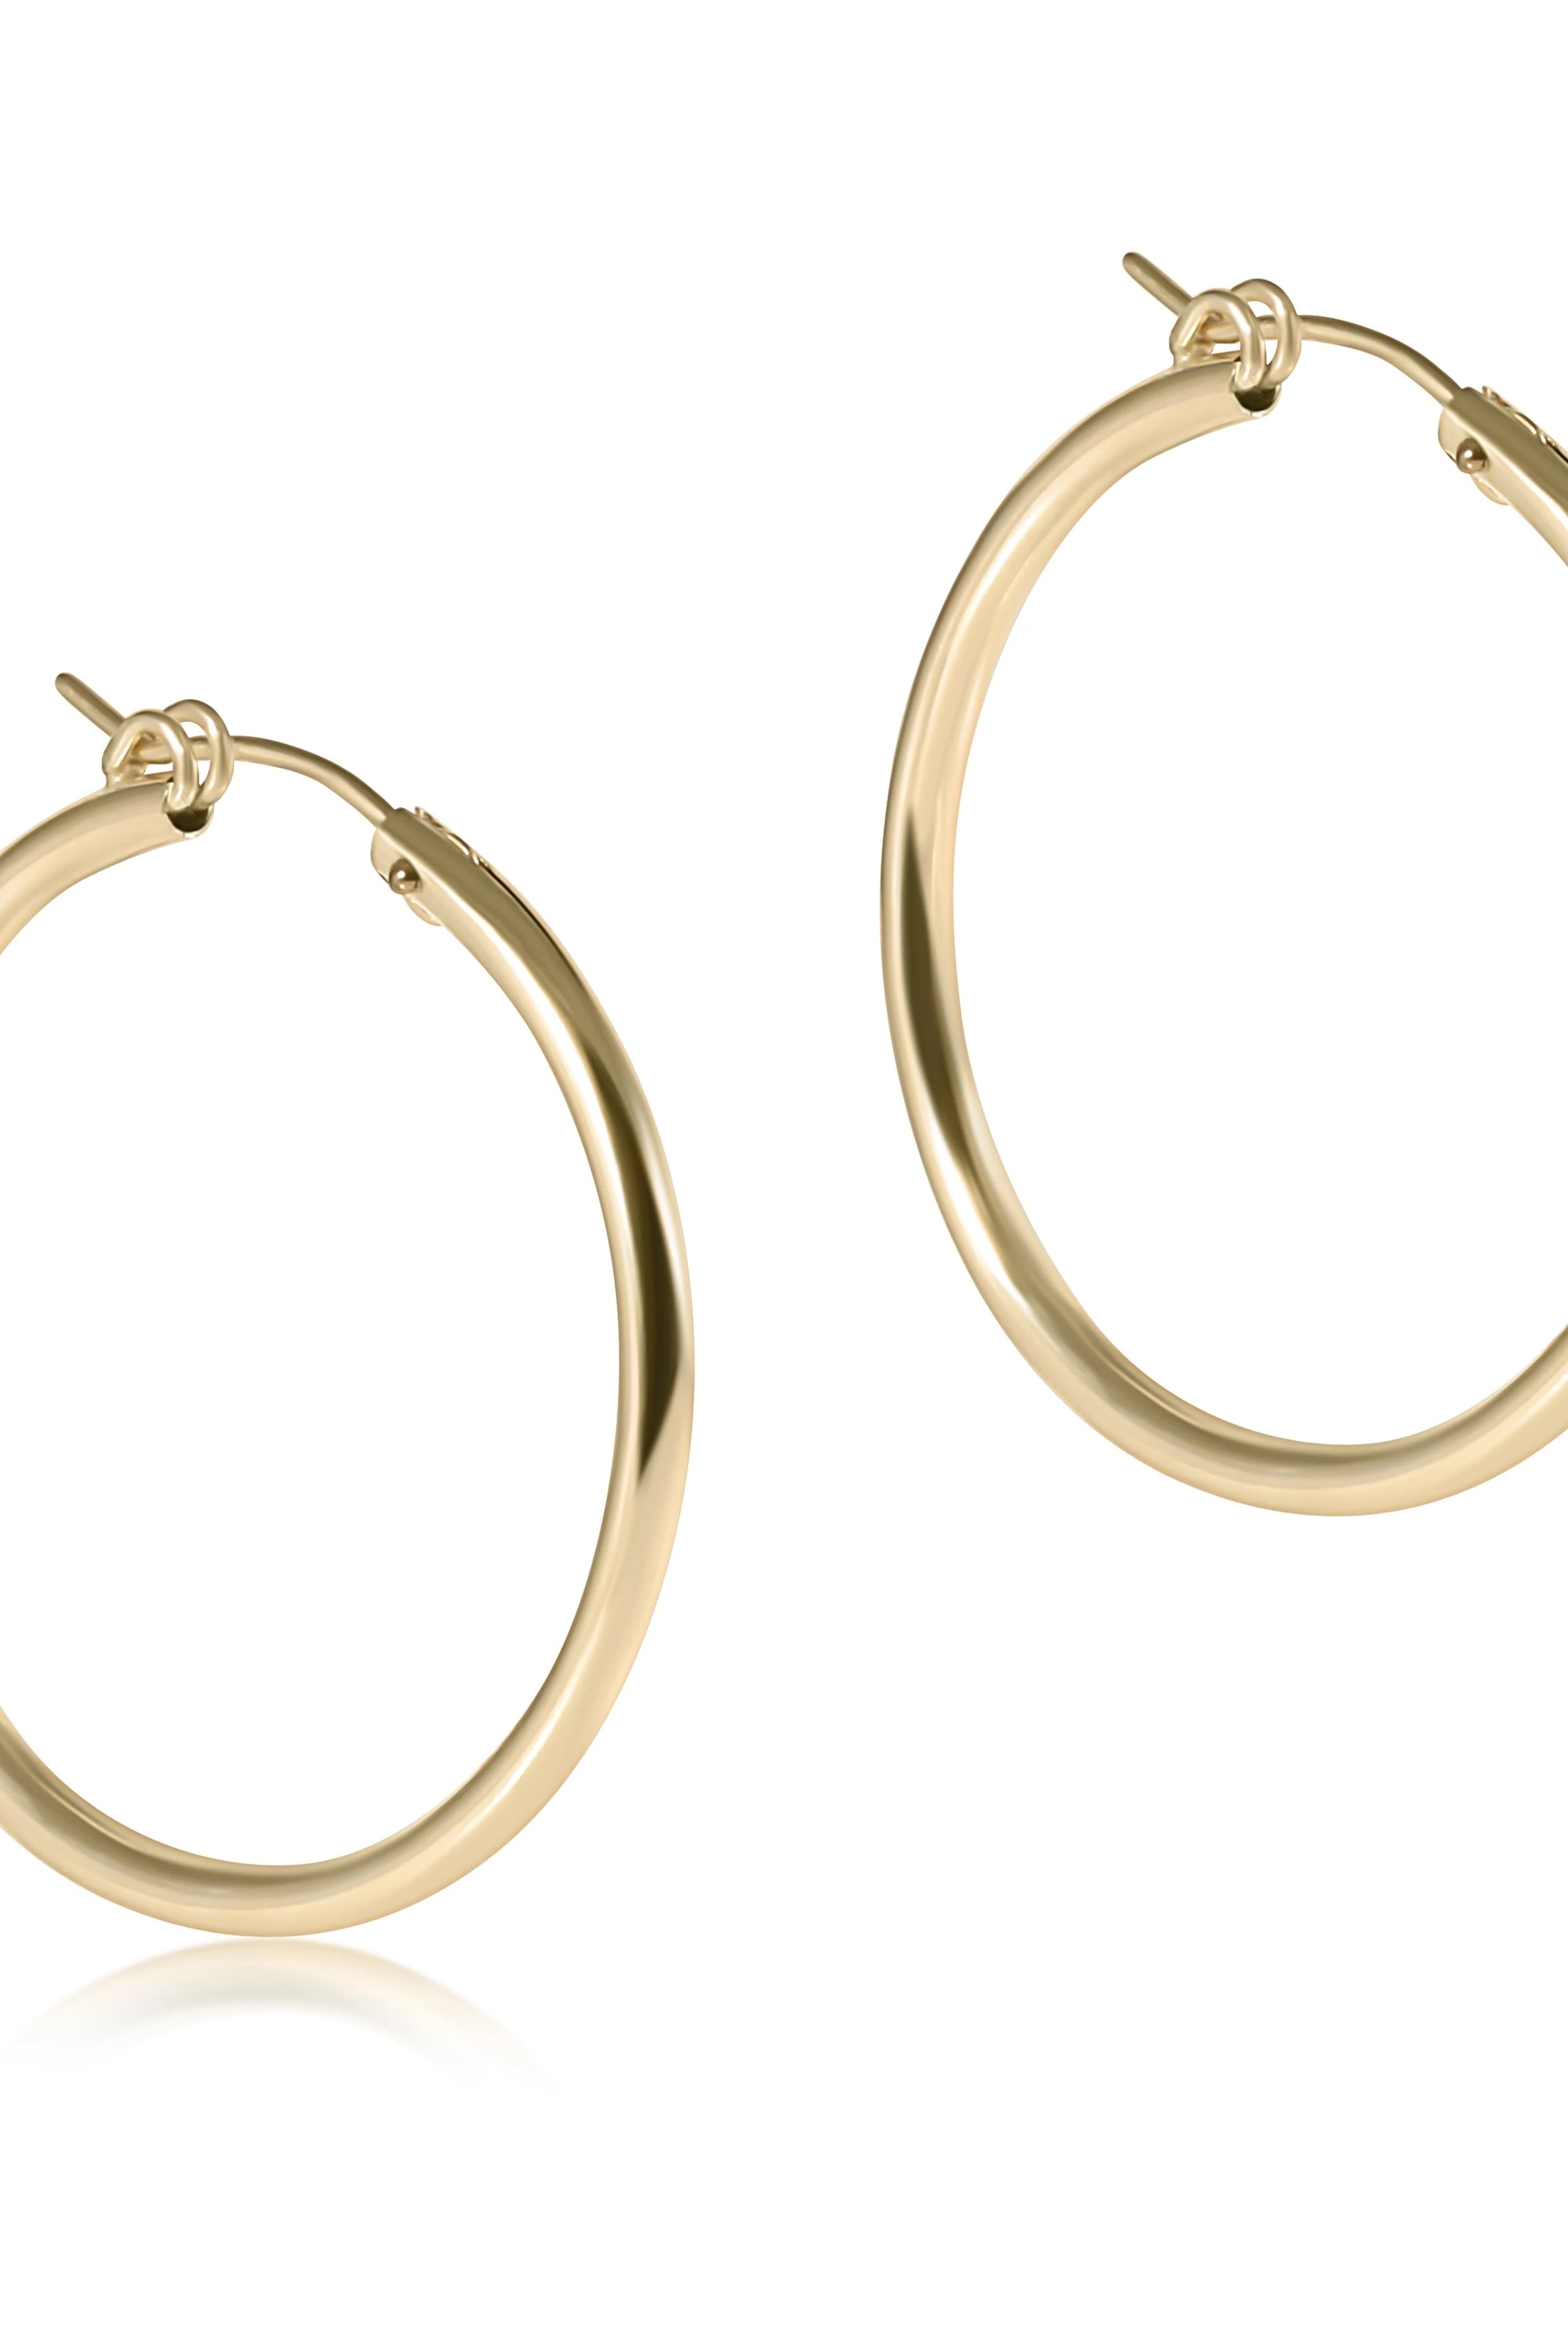 Round Gold Smooth Hoop-Earrings-The Lovely Closet-The Lovely Closet, Women's Fashion Boutique in Alexandria, KY